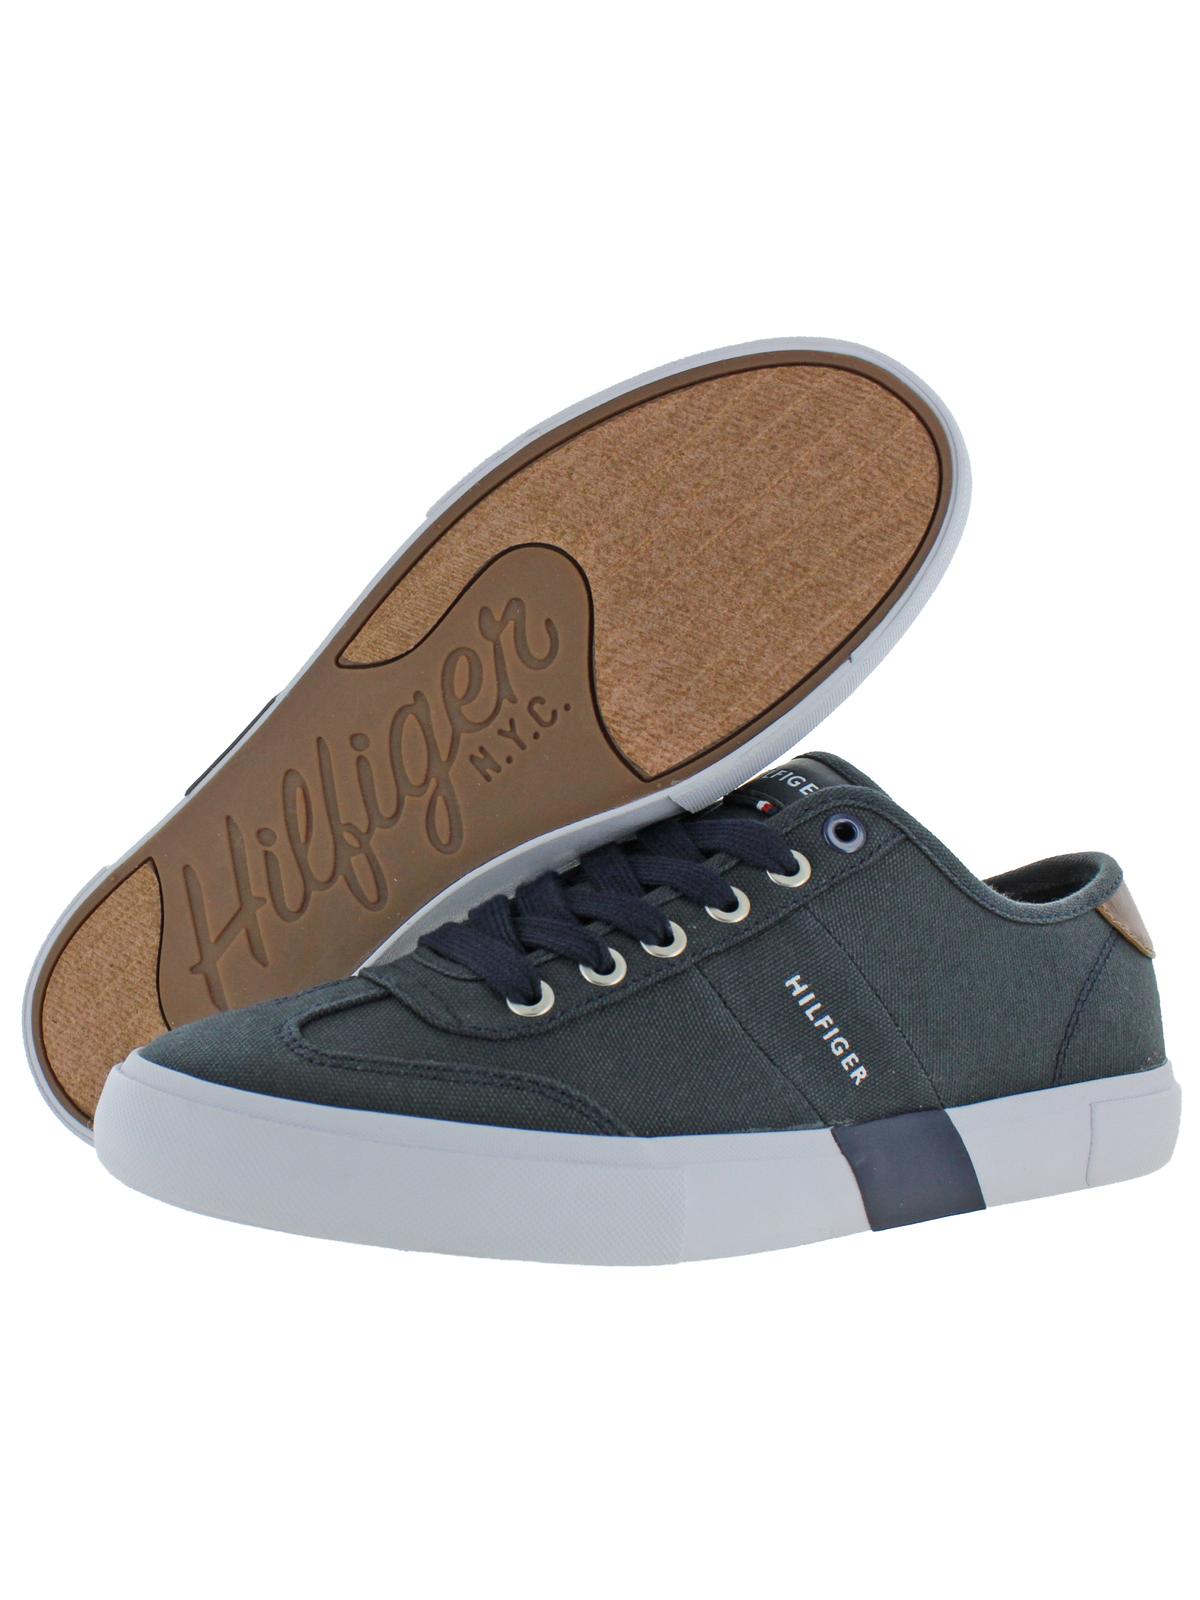 Tommy Hilfiger Mens Pandora Padded Insoles Fashion Sneakers Navy 11.5 Medium (D) - image 2 of 2